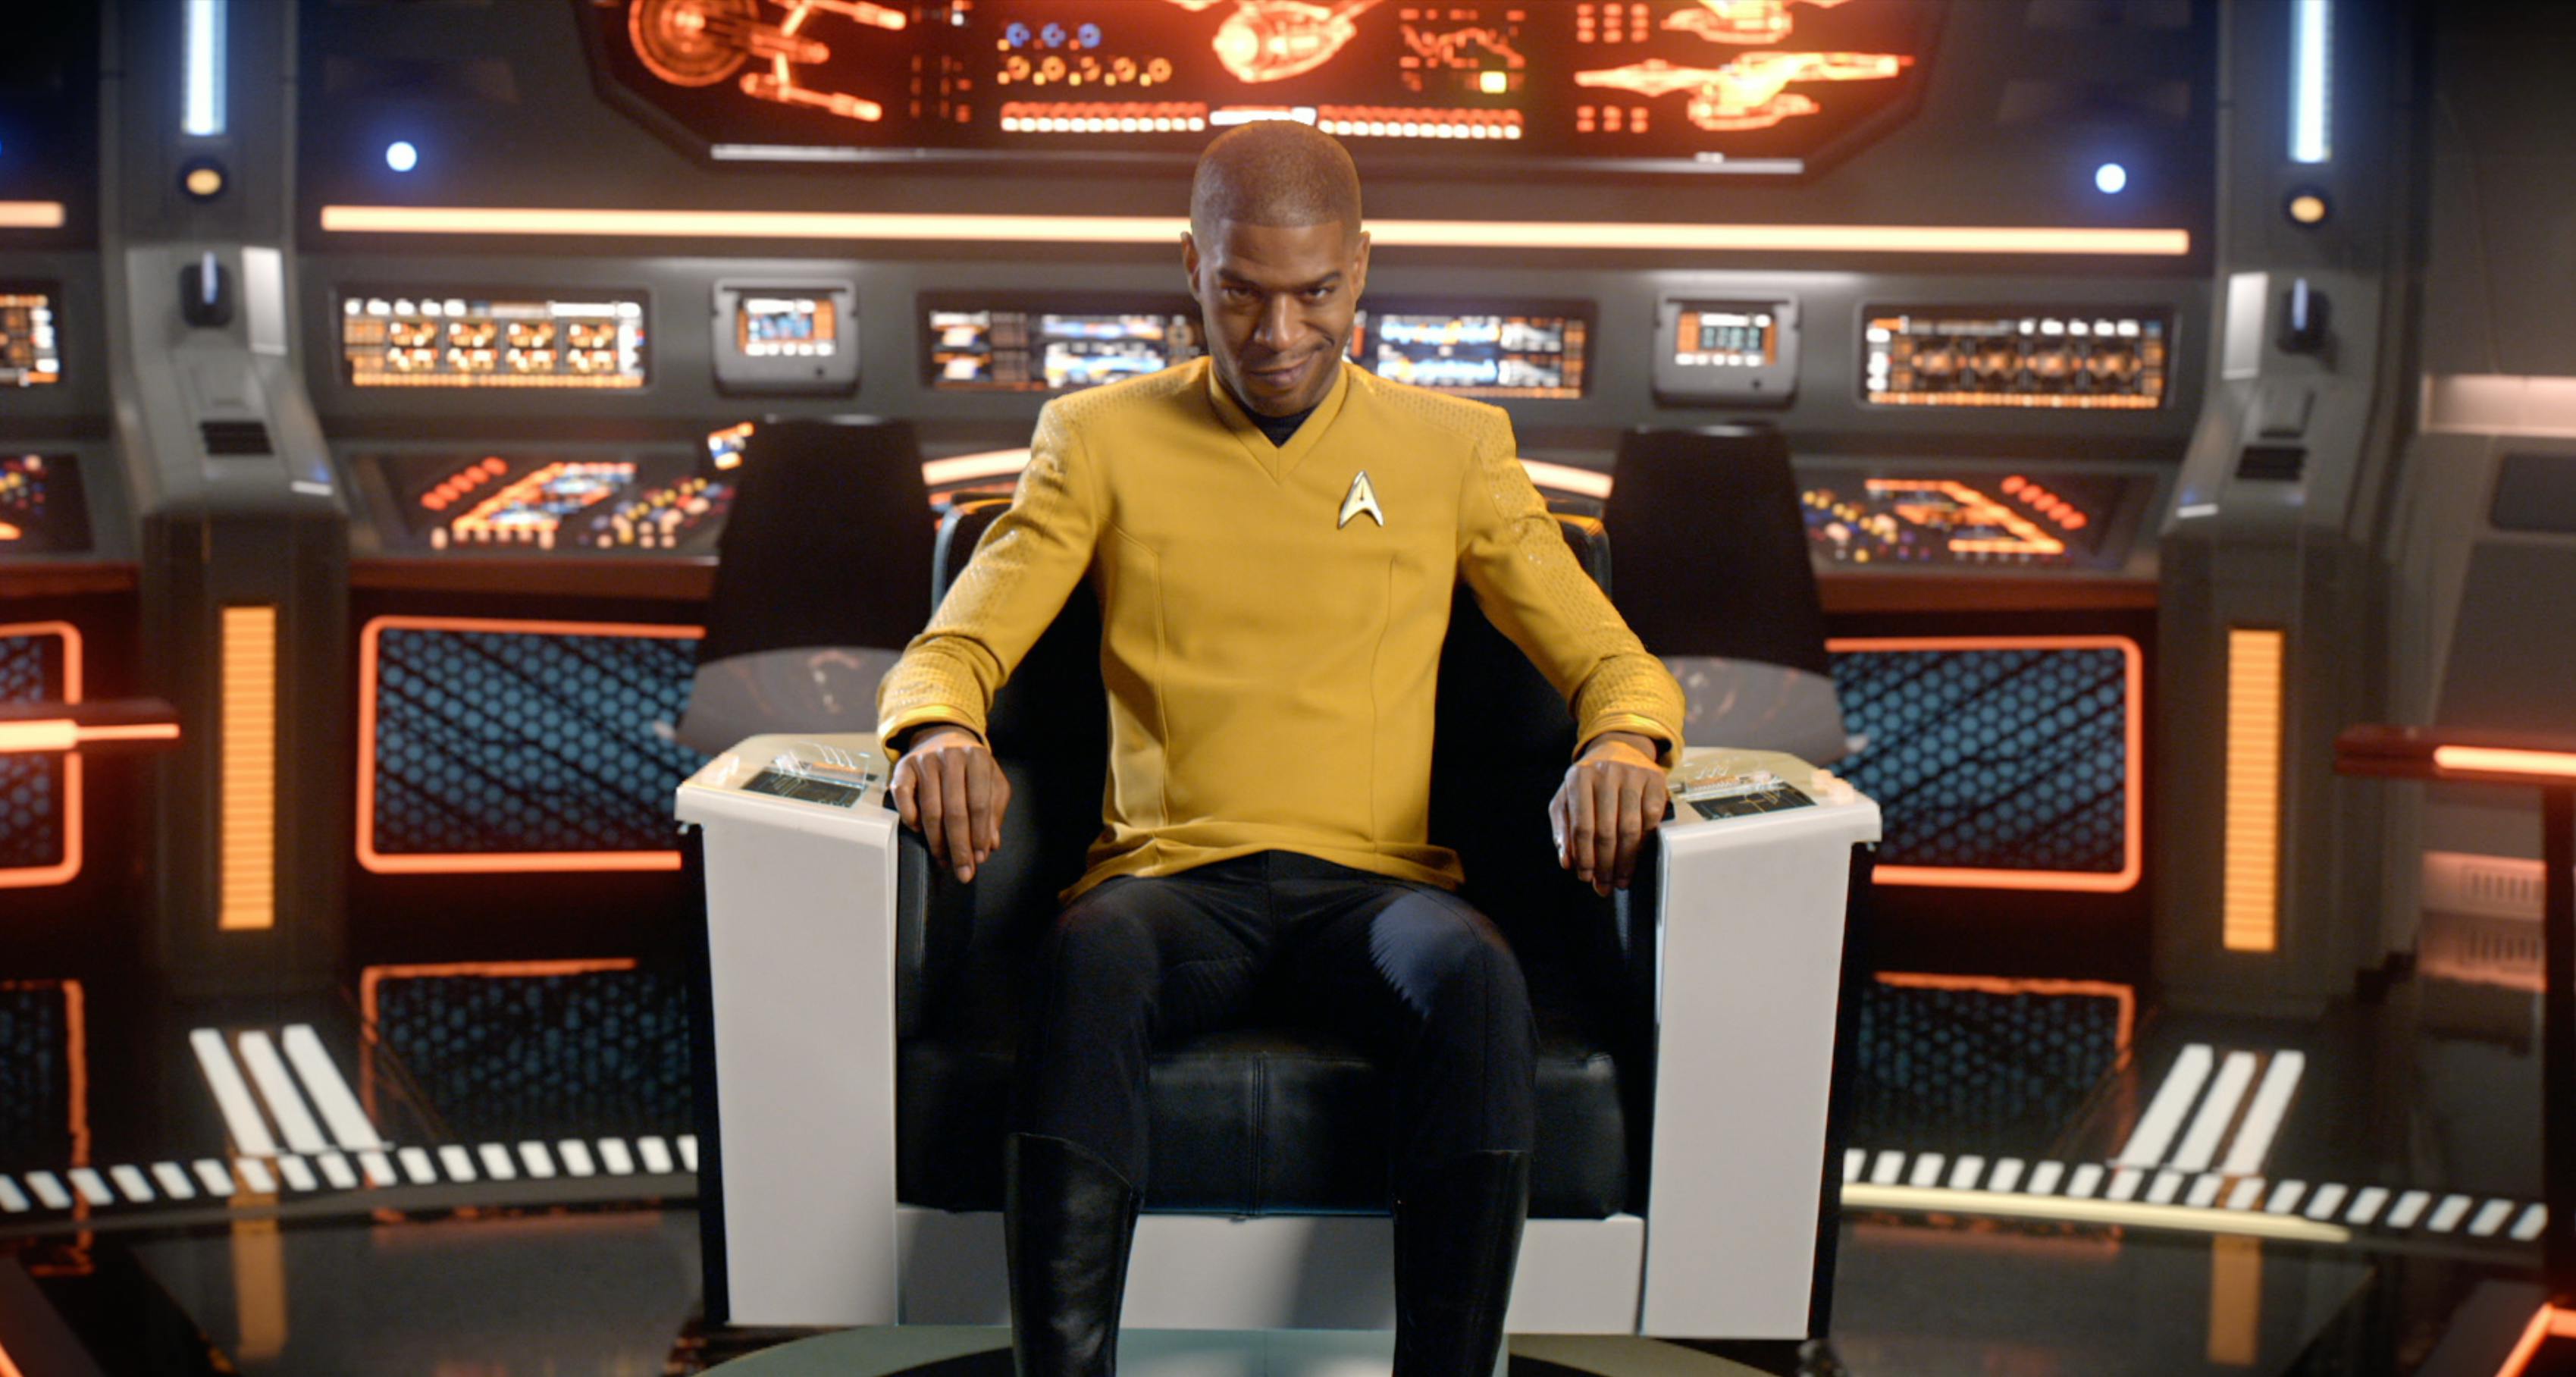 Scott Mescudi (Kid Cudi) in a Starfleet uniform sits  at the captain's chair on the bridge of the Enterprise and narrows his gaze intensely in front of him